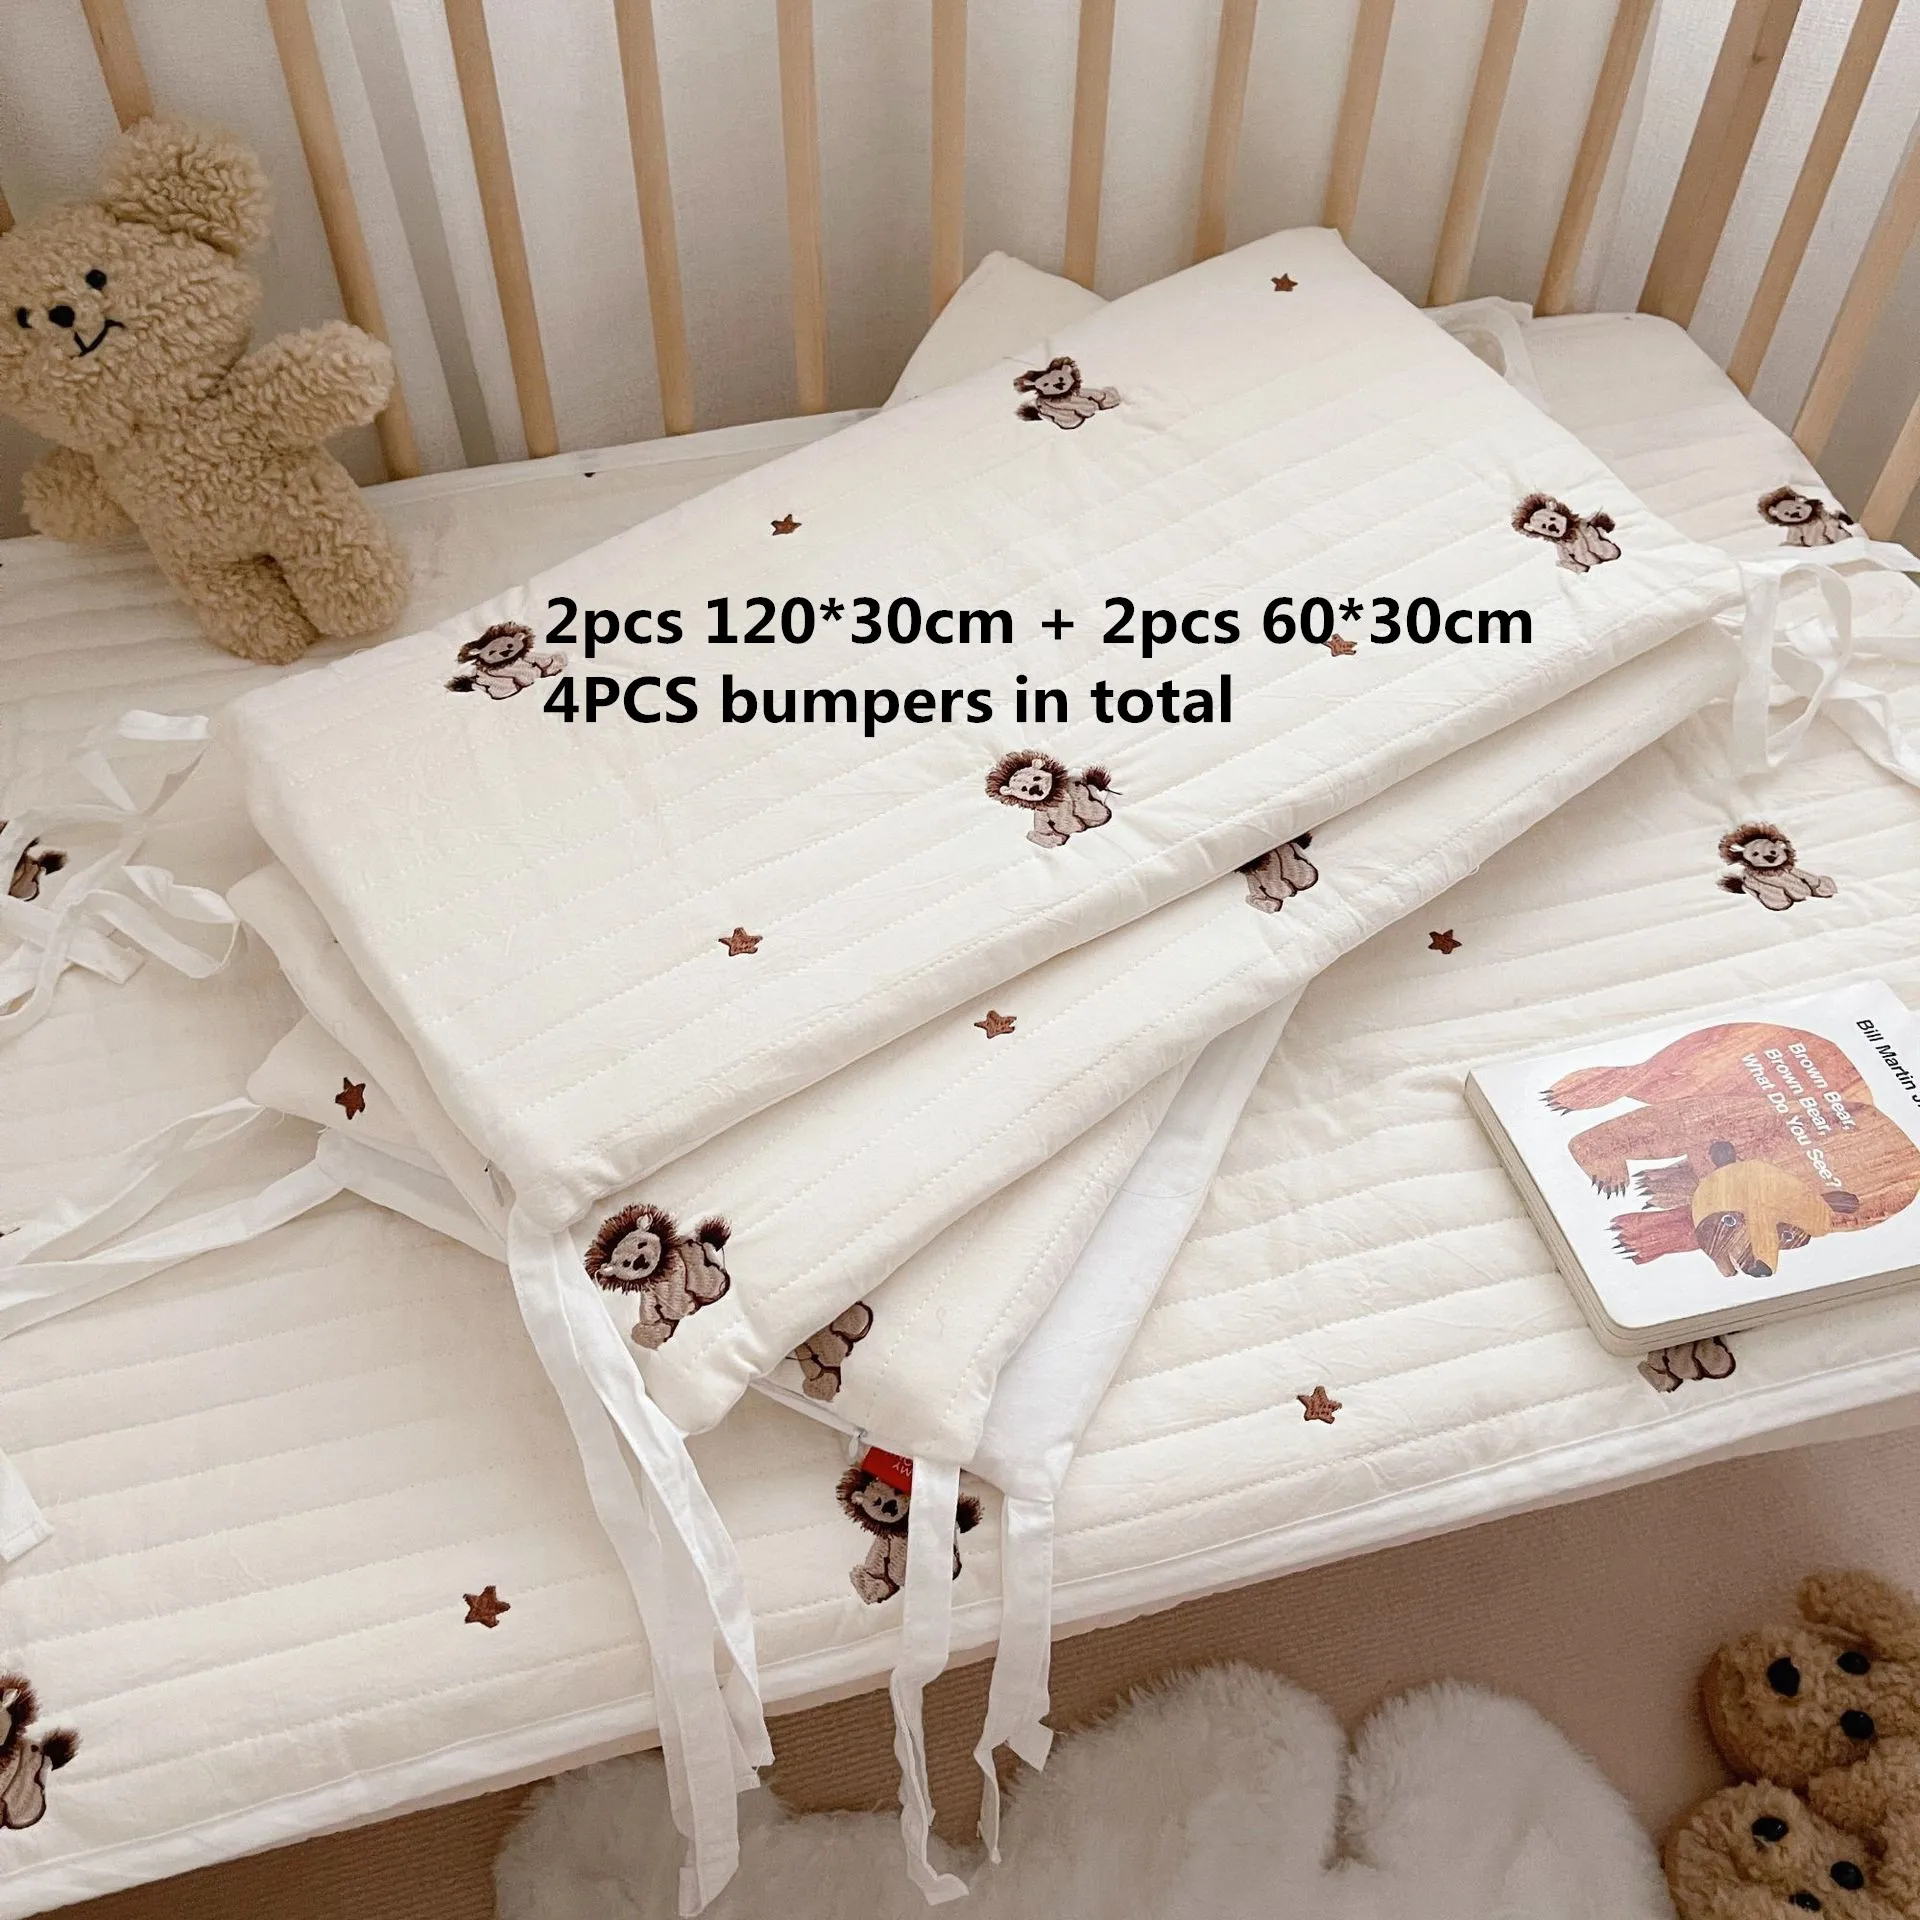 Korean Quilted Cotton Baby Bed Sheet Olive Bear Embroidery Cot Crib Sheets Bumper +Pillowcase Bedding | Мать и ребенок